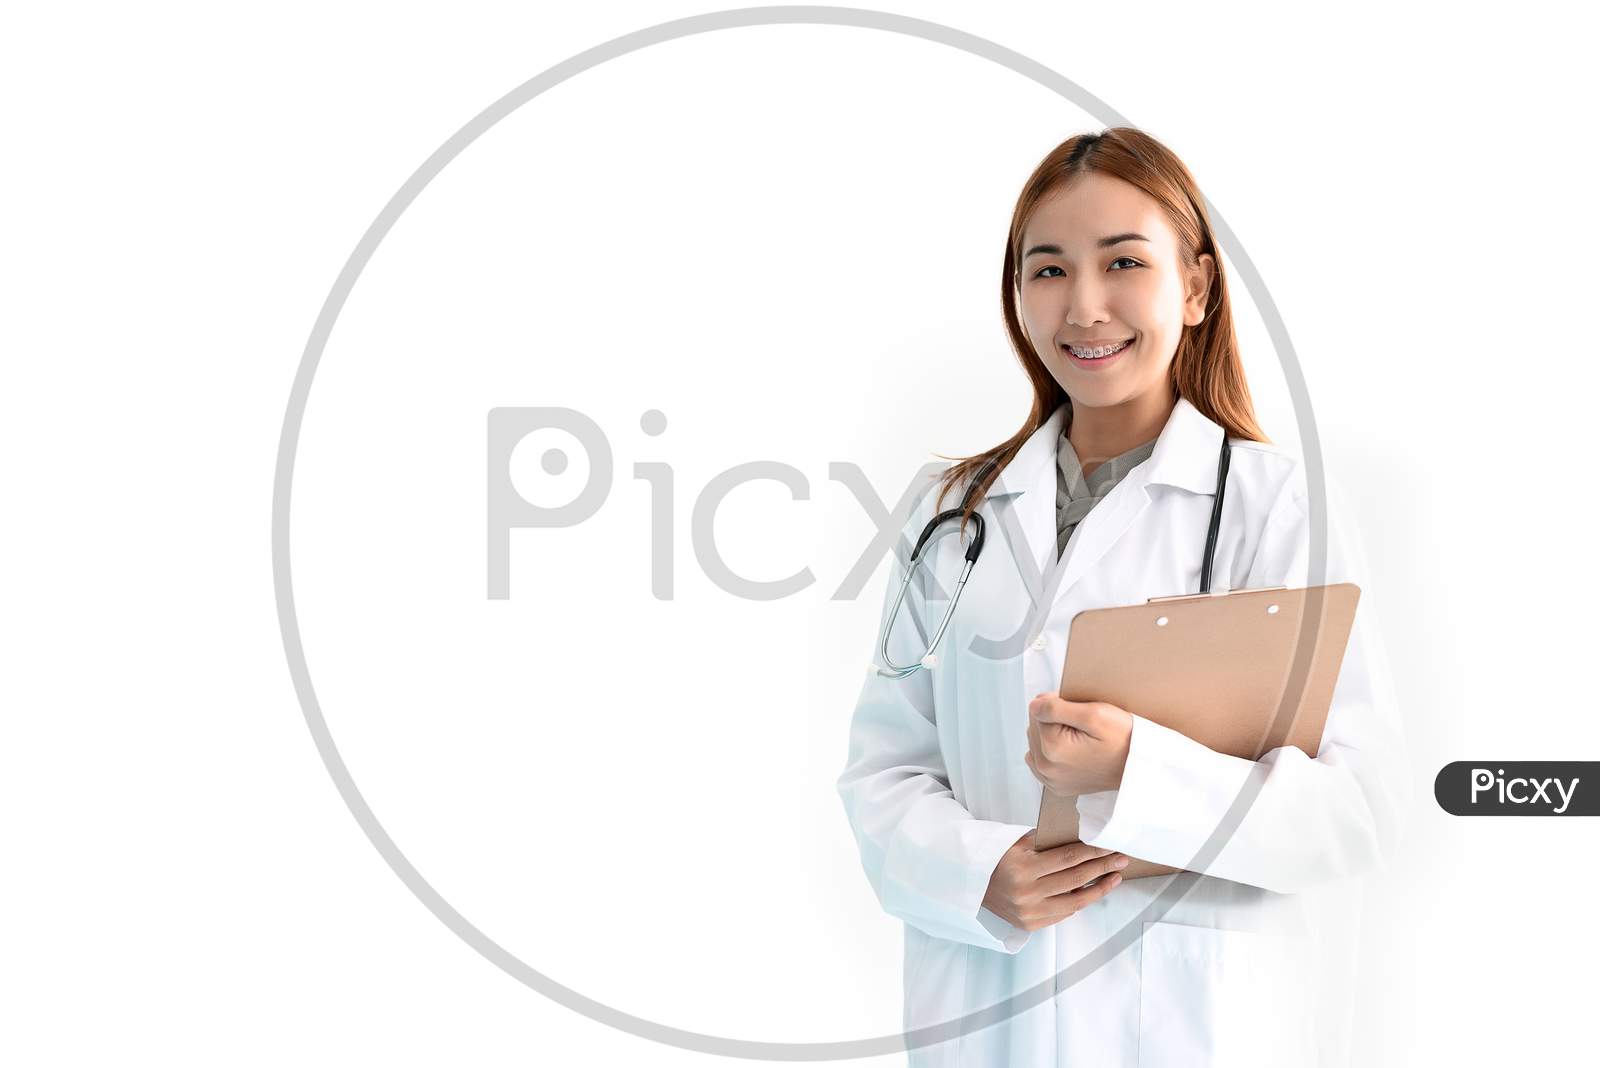 Women Doctor Is Holding The Report File With Stethoscope On White Isolated Background. Medical And Healthcare Concept. Hospital And People Theme